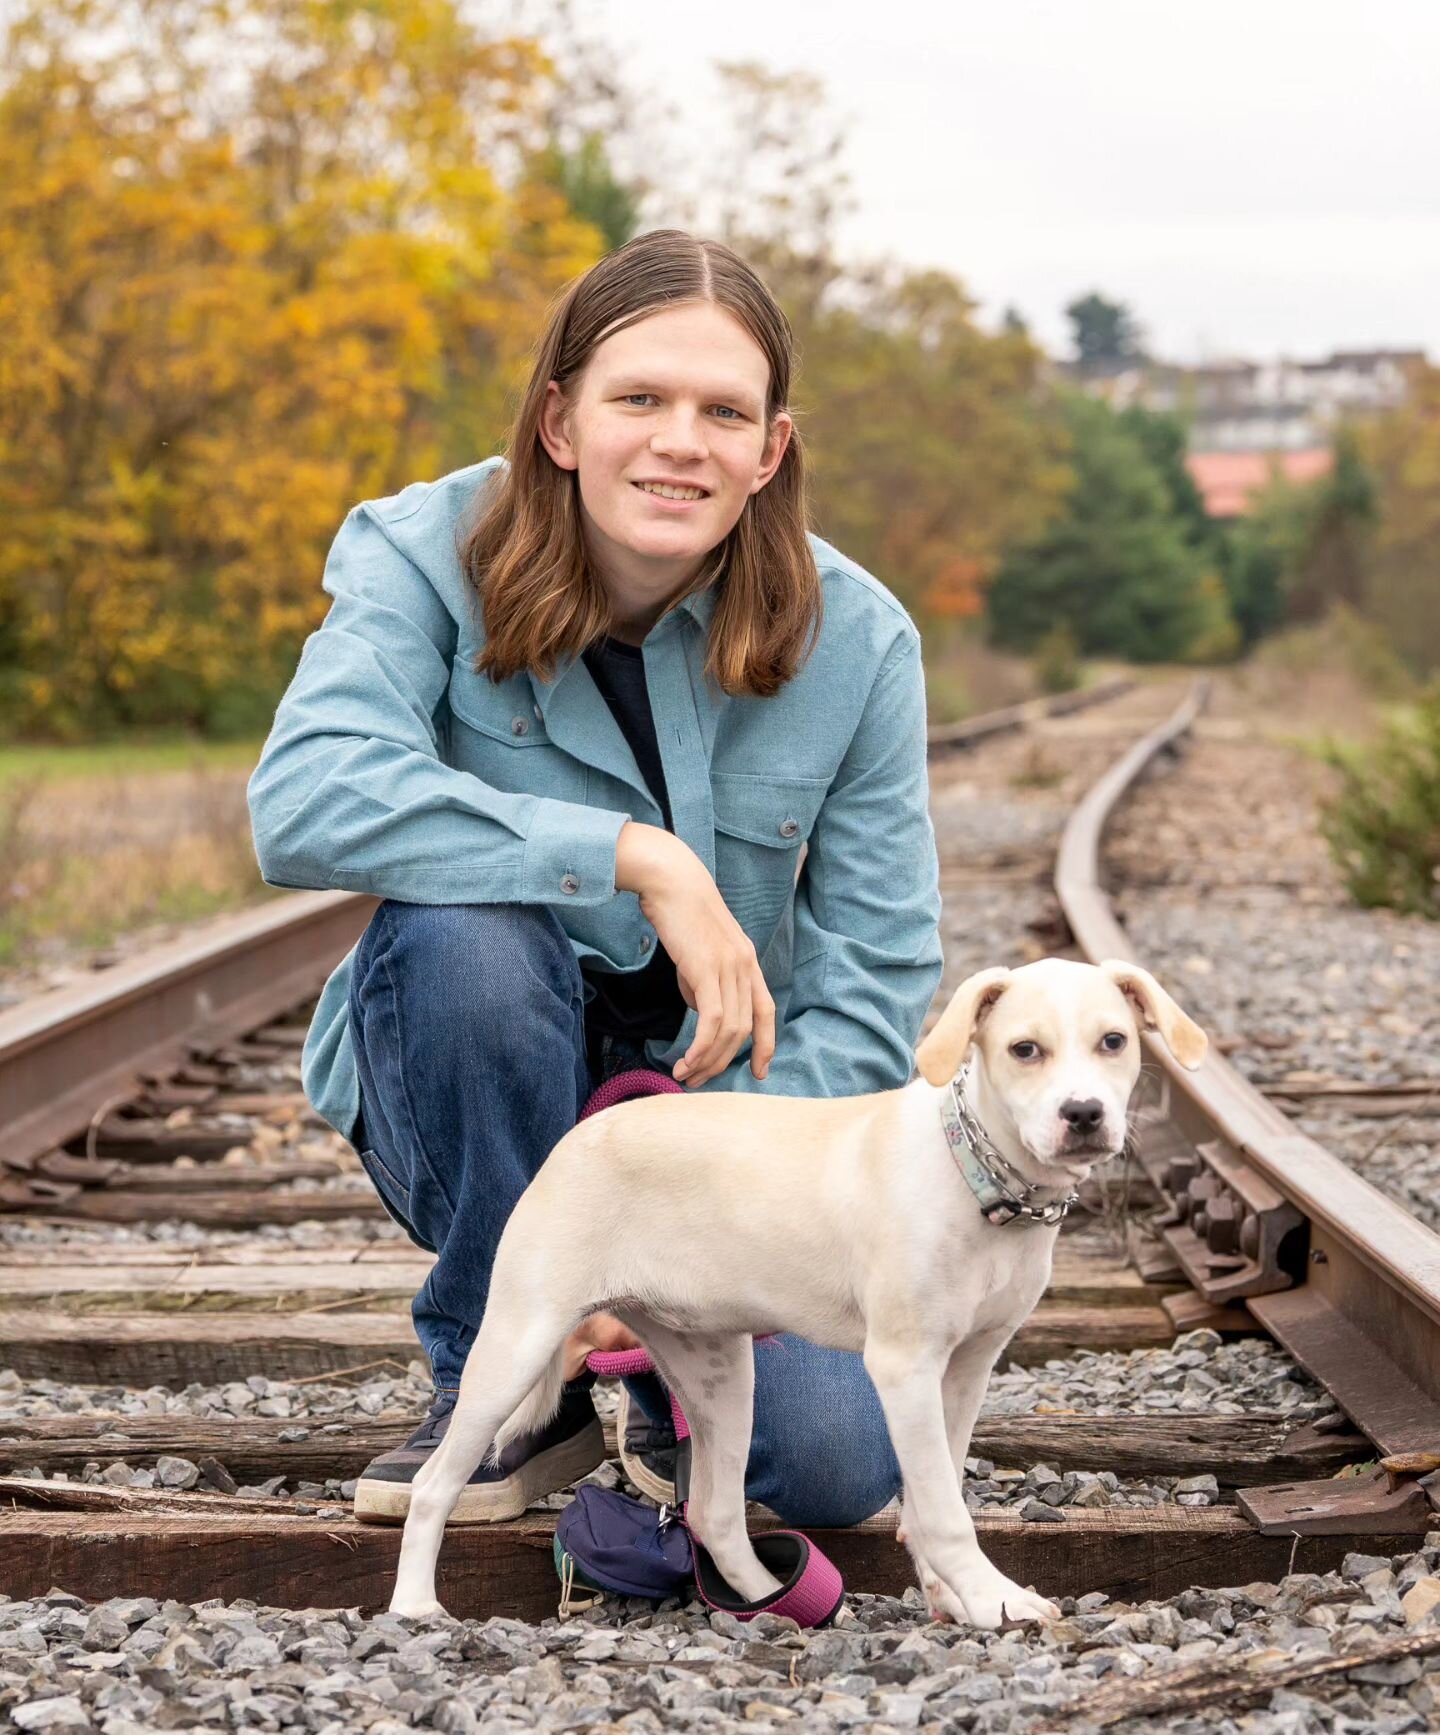 Always love when people want to include their pets! 
.
.
.
.
.
#seniorportraits #seniorphotography #cumberland #marylandphotographer #westernmaryland #portraitphotography #sonyphotography #sonyalpha #pennsylvaniaphotographer #pets #petphotography #se